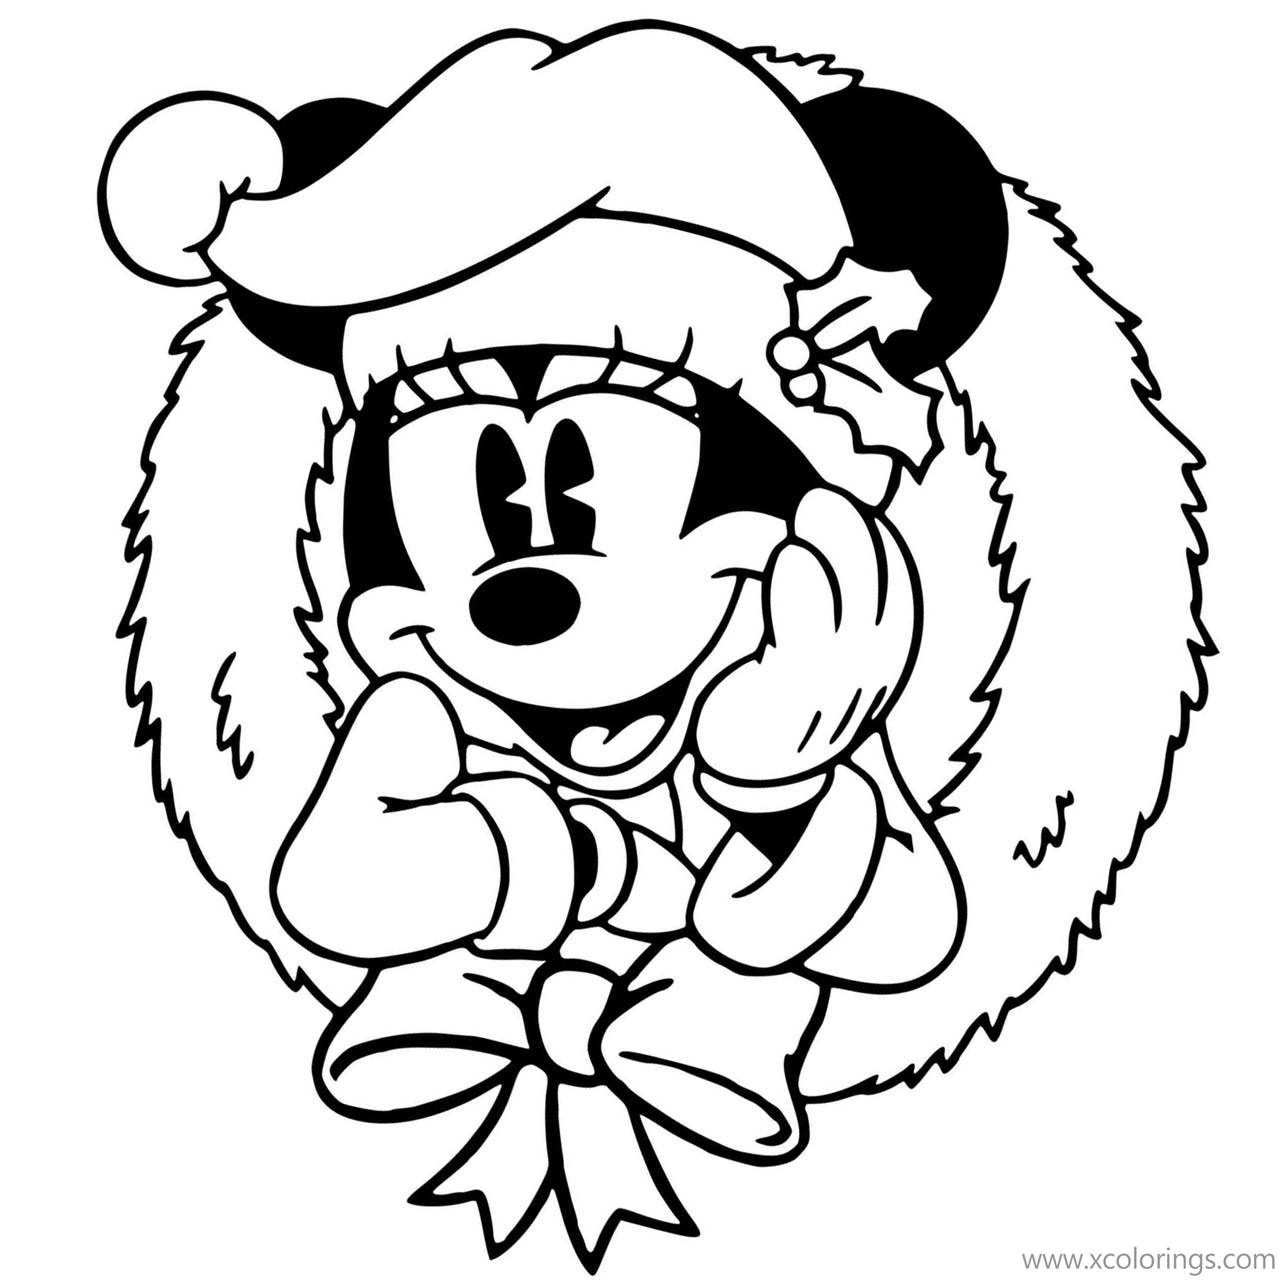 Free Minnie Mouse with Christmas Wreath Coloring Pages printable